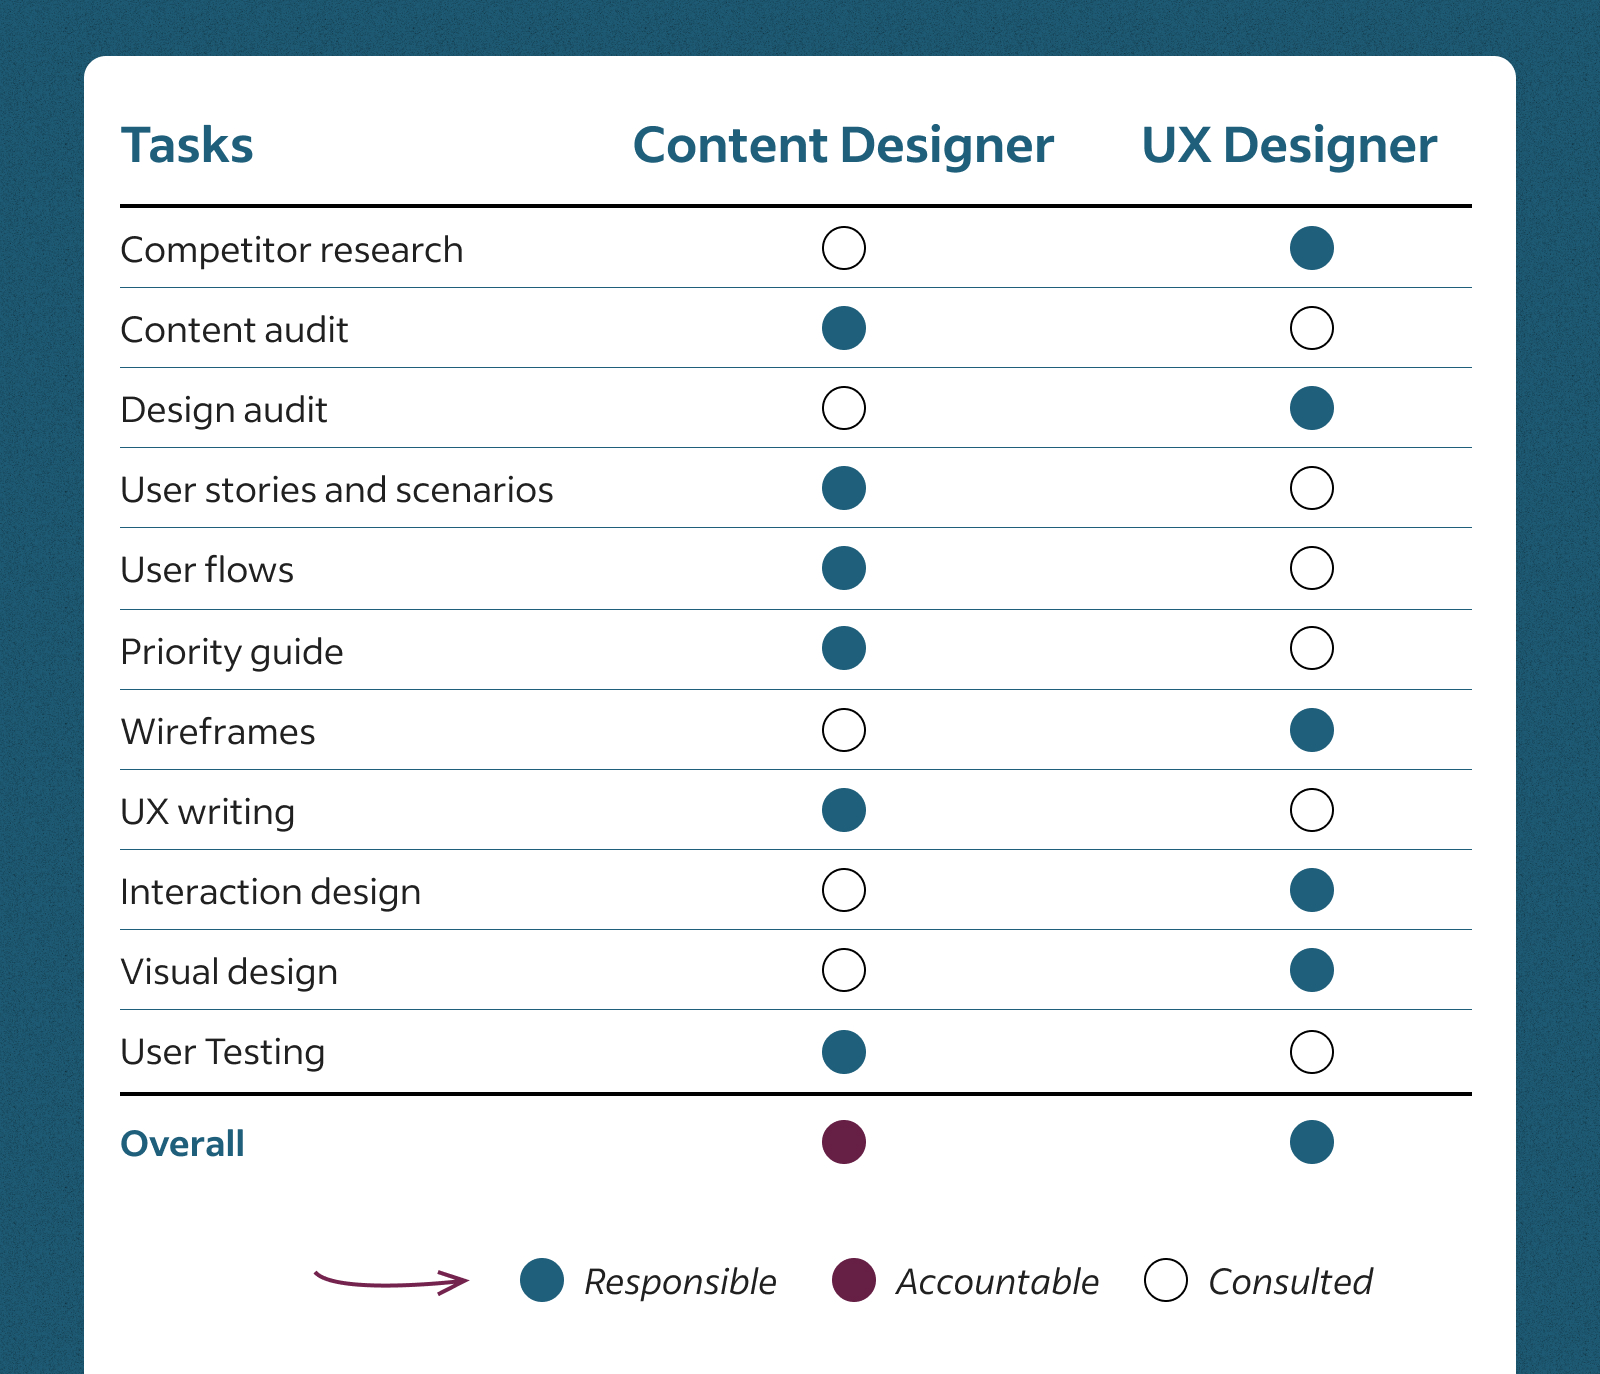 Where UX writing fits in on the design team